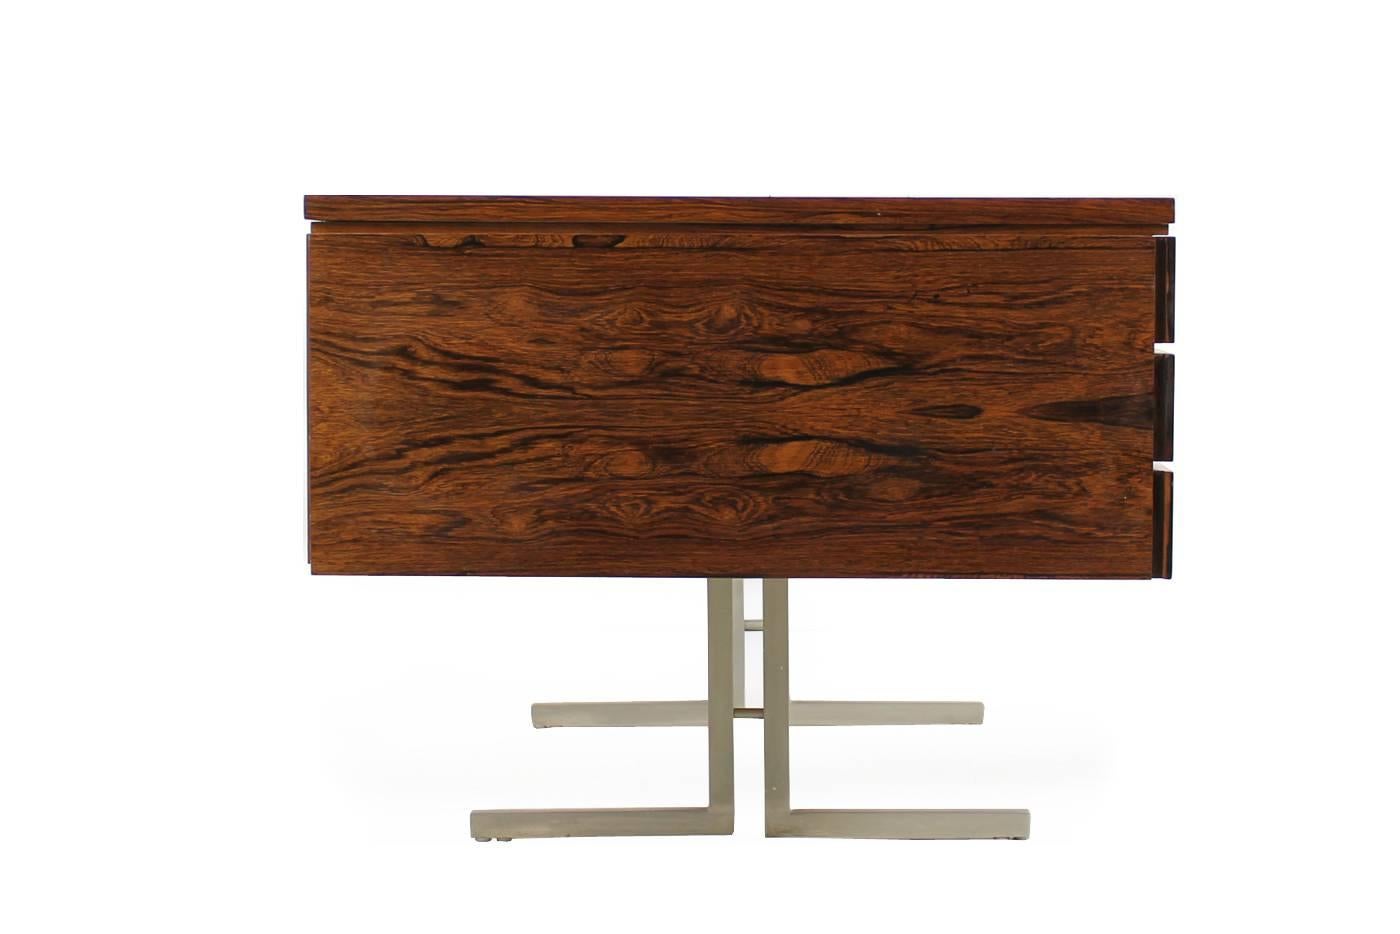 Beautiful desk, rosewood and metal, maple wood inside, fantastic condition and a very minimalistic form and design. freestanding, both keys. Beautiful piece.